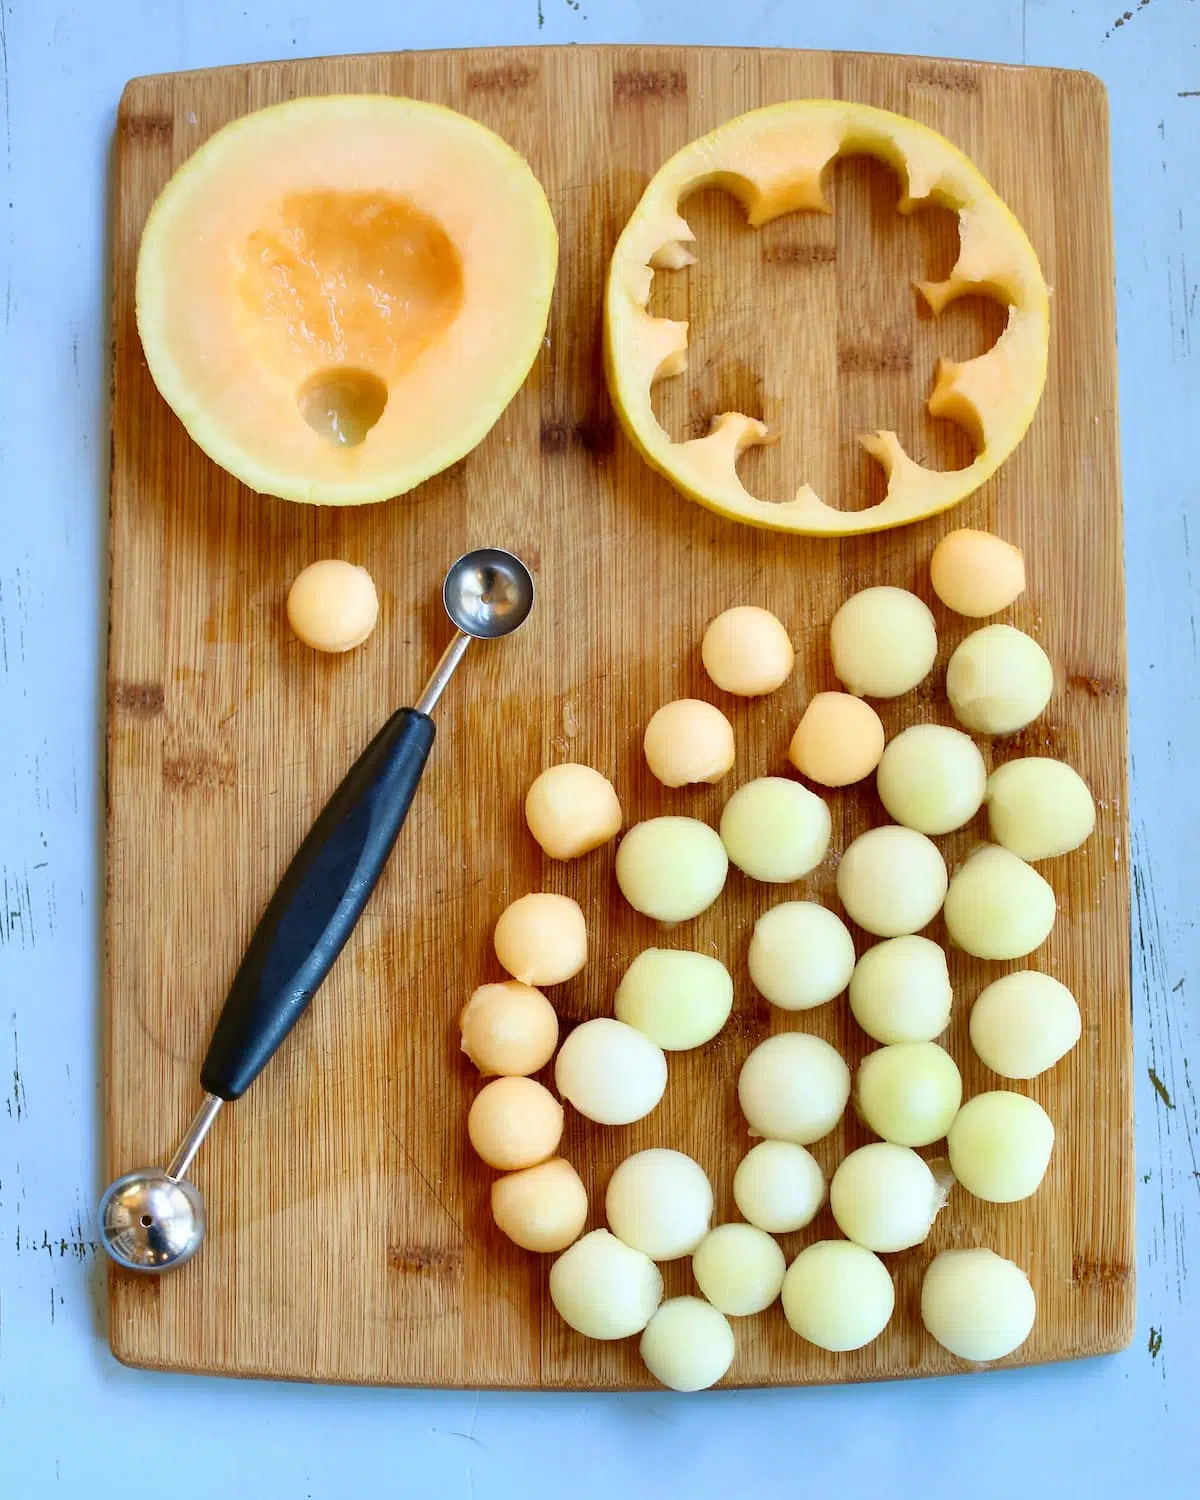 a cutting board with melon balls cut out and a melon baller.